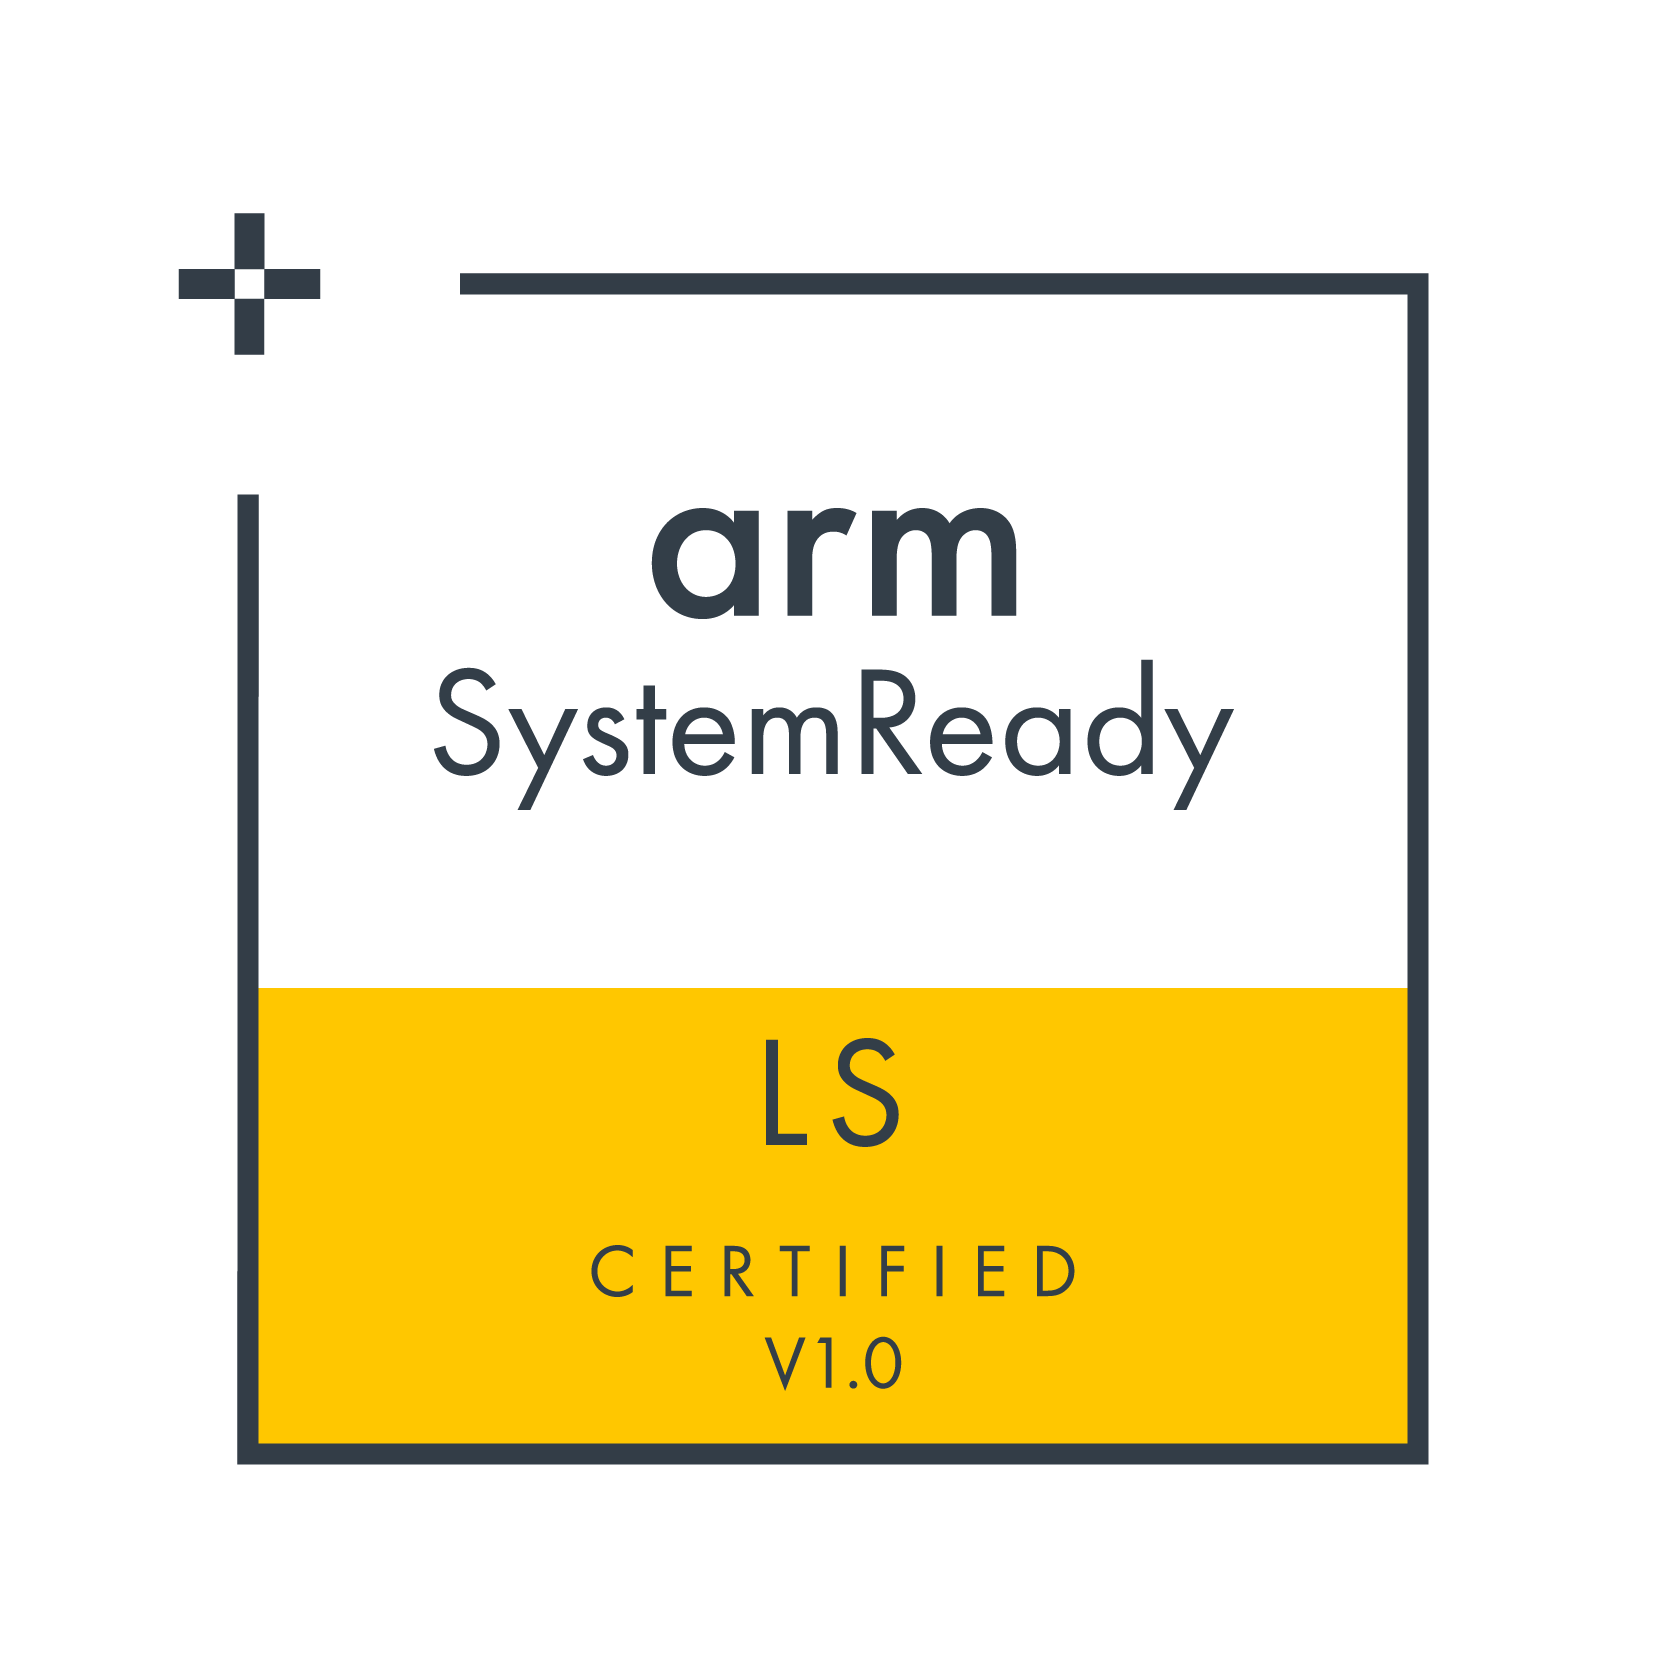 Arm SystemReady LS Certified Stamp Logo